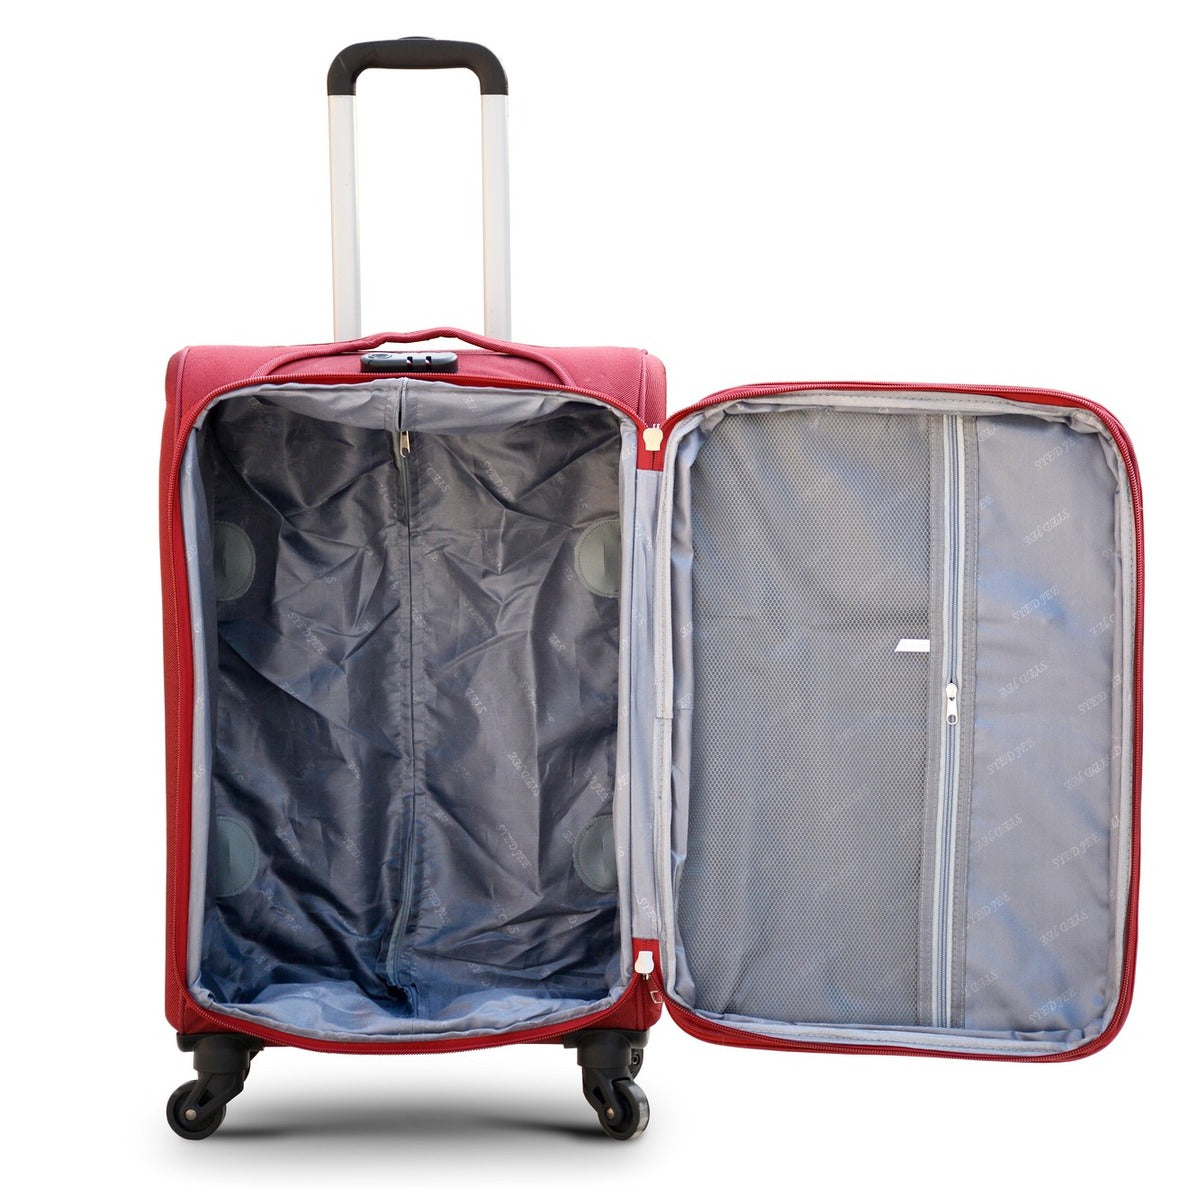 20" Red Colour SJ JIAN 4 Wheel Luggage Lightweight Soft Material Carry On Trolley Bag